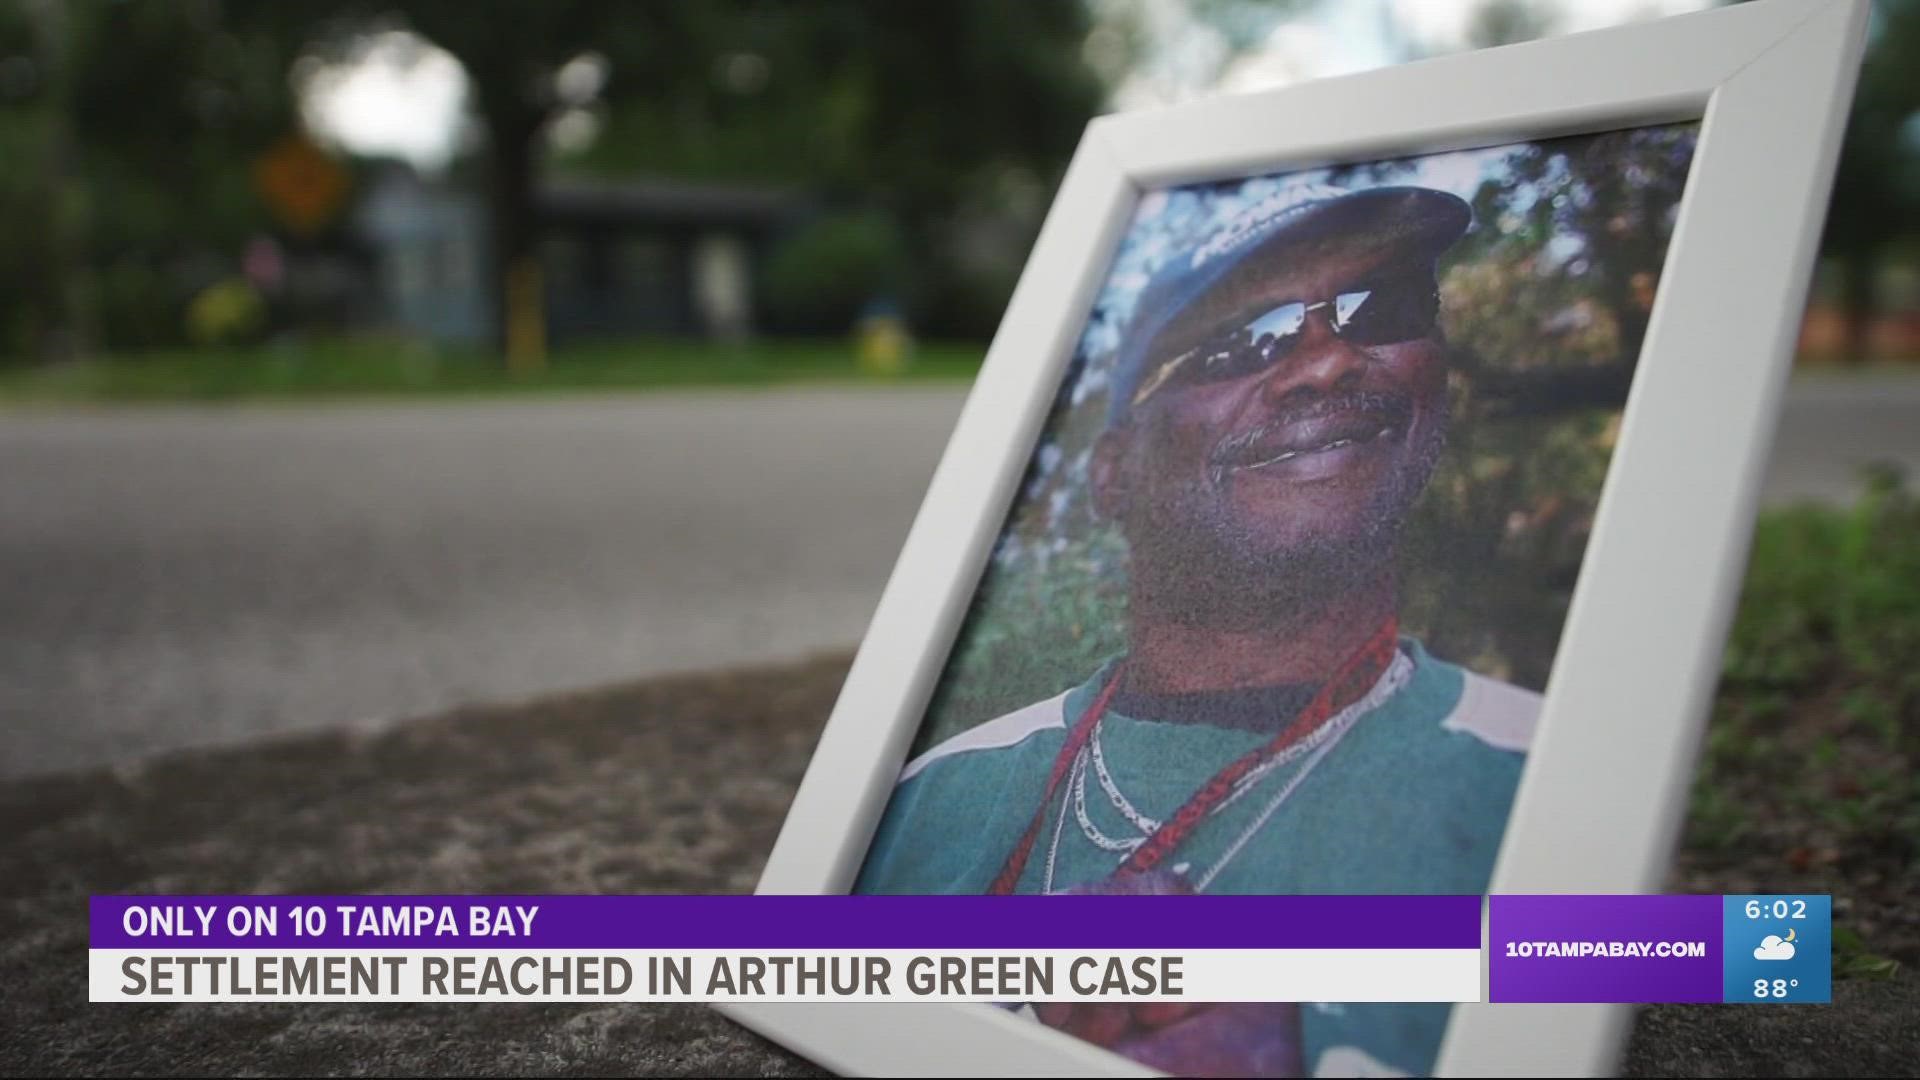 TPD is changing restraint policies as part of a settlement involving Arthur Green Jr., who suffered a medical emergency and died after a traffic stop in 2014.